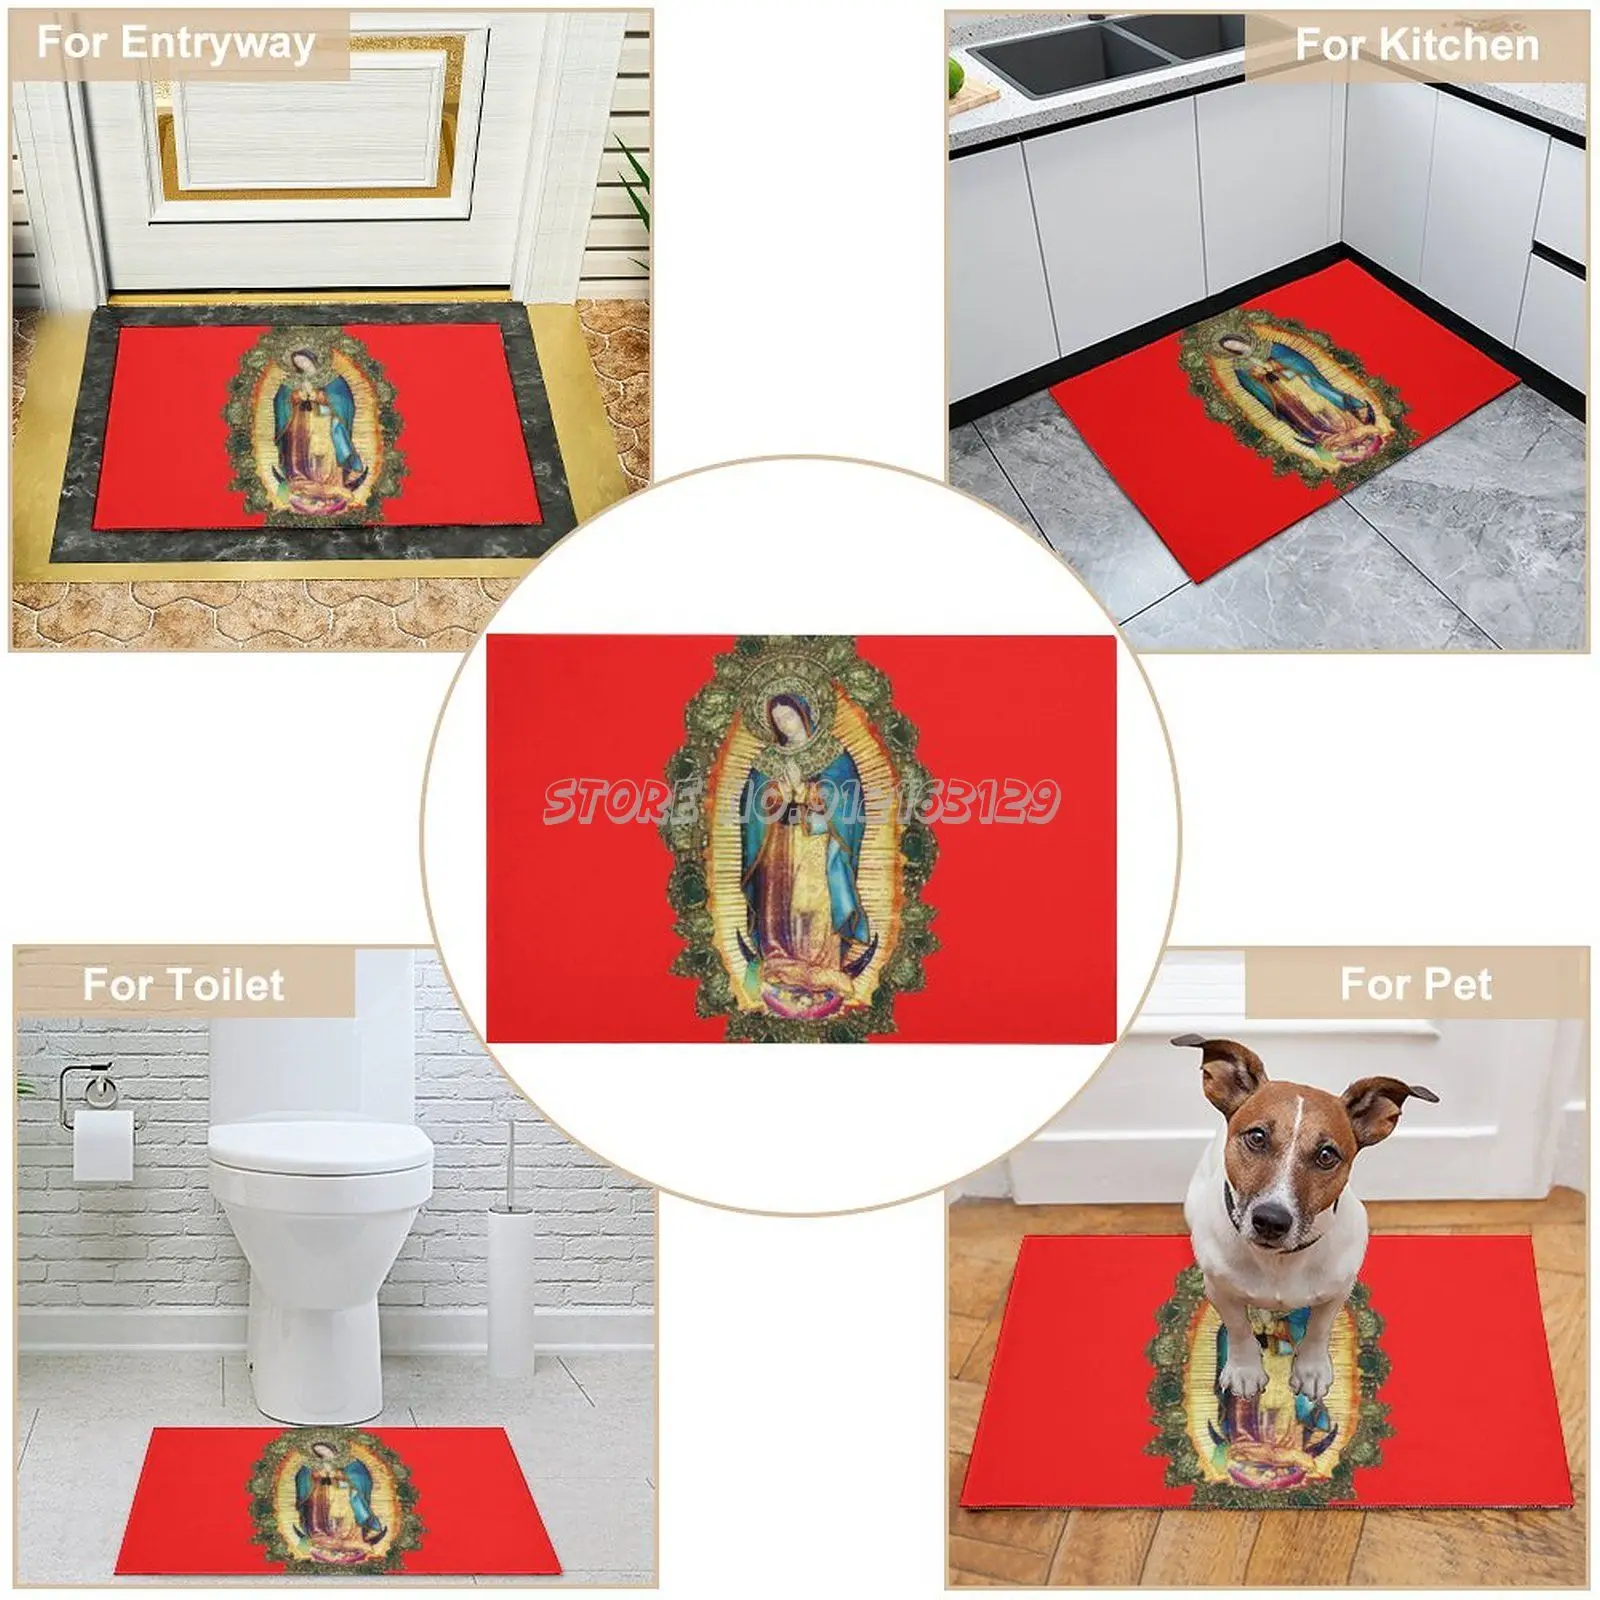 

Our Lady of Guadalupe Mexican Virgin Mary Mexico Angels Tilma Aztec Queen of Heaven Doormat Carpet for Living Room Door Mat Deco